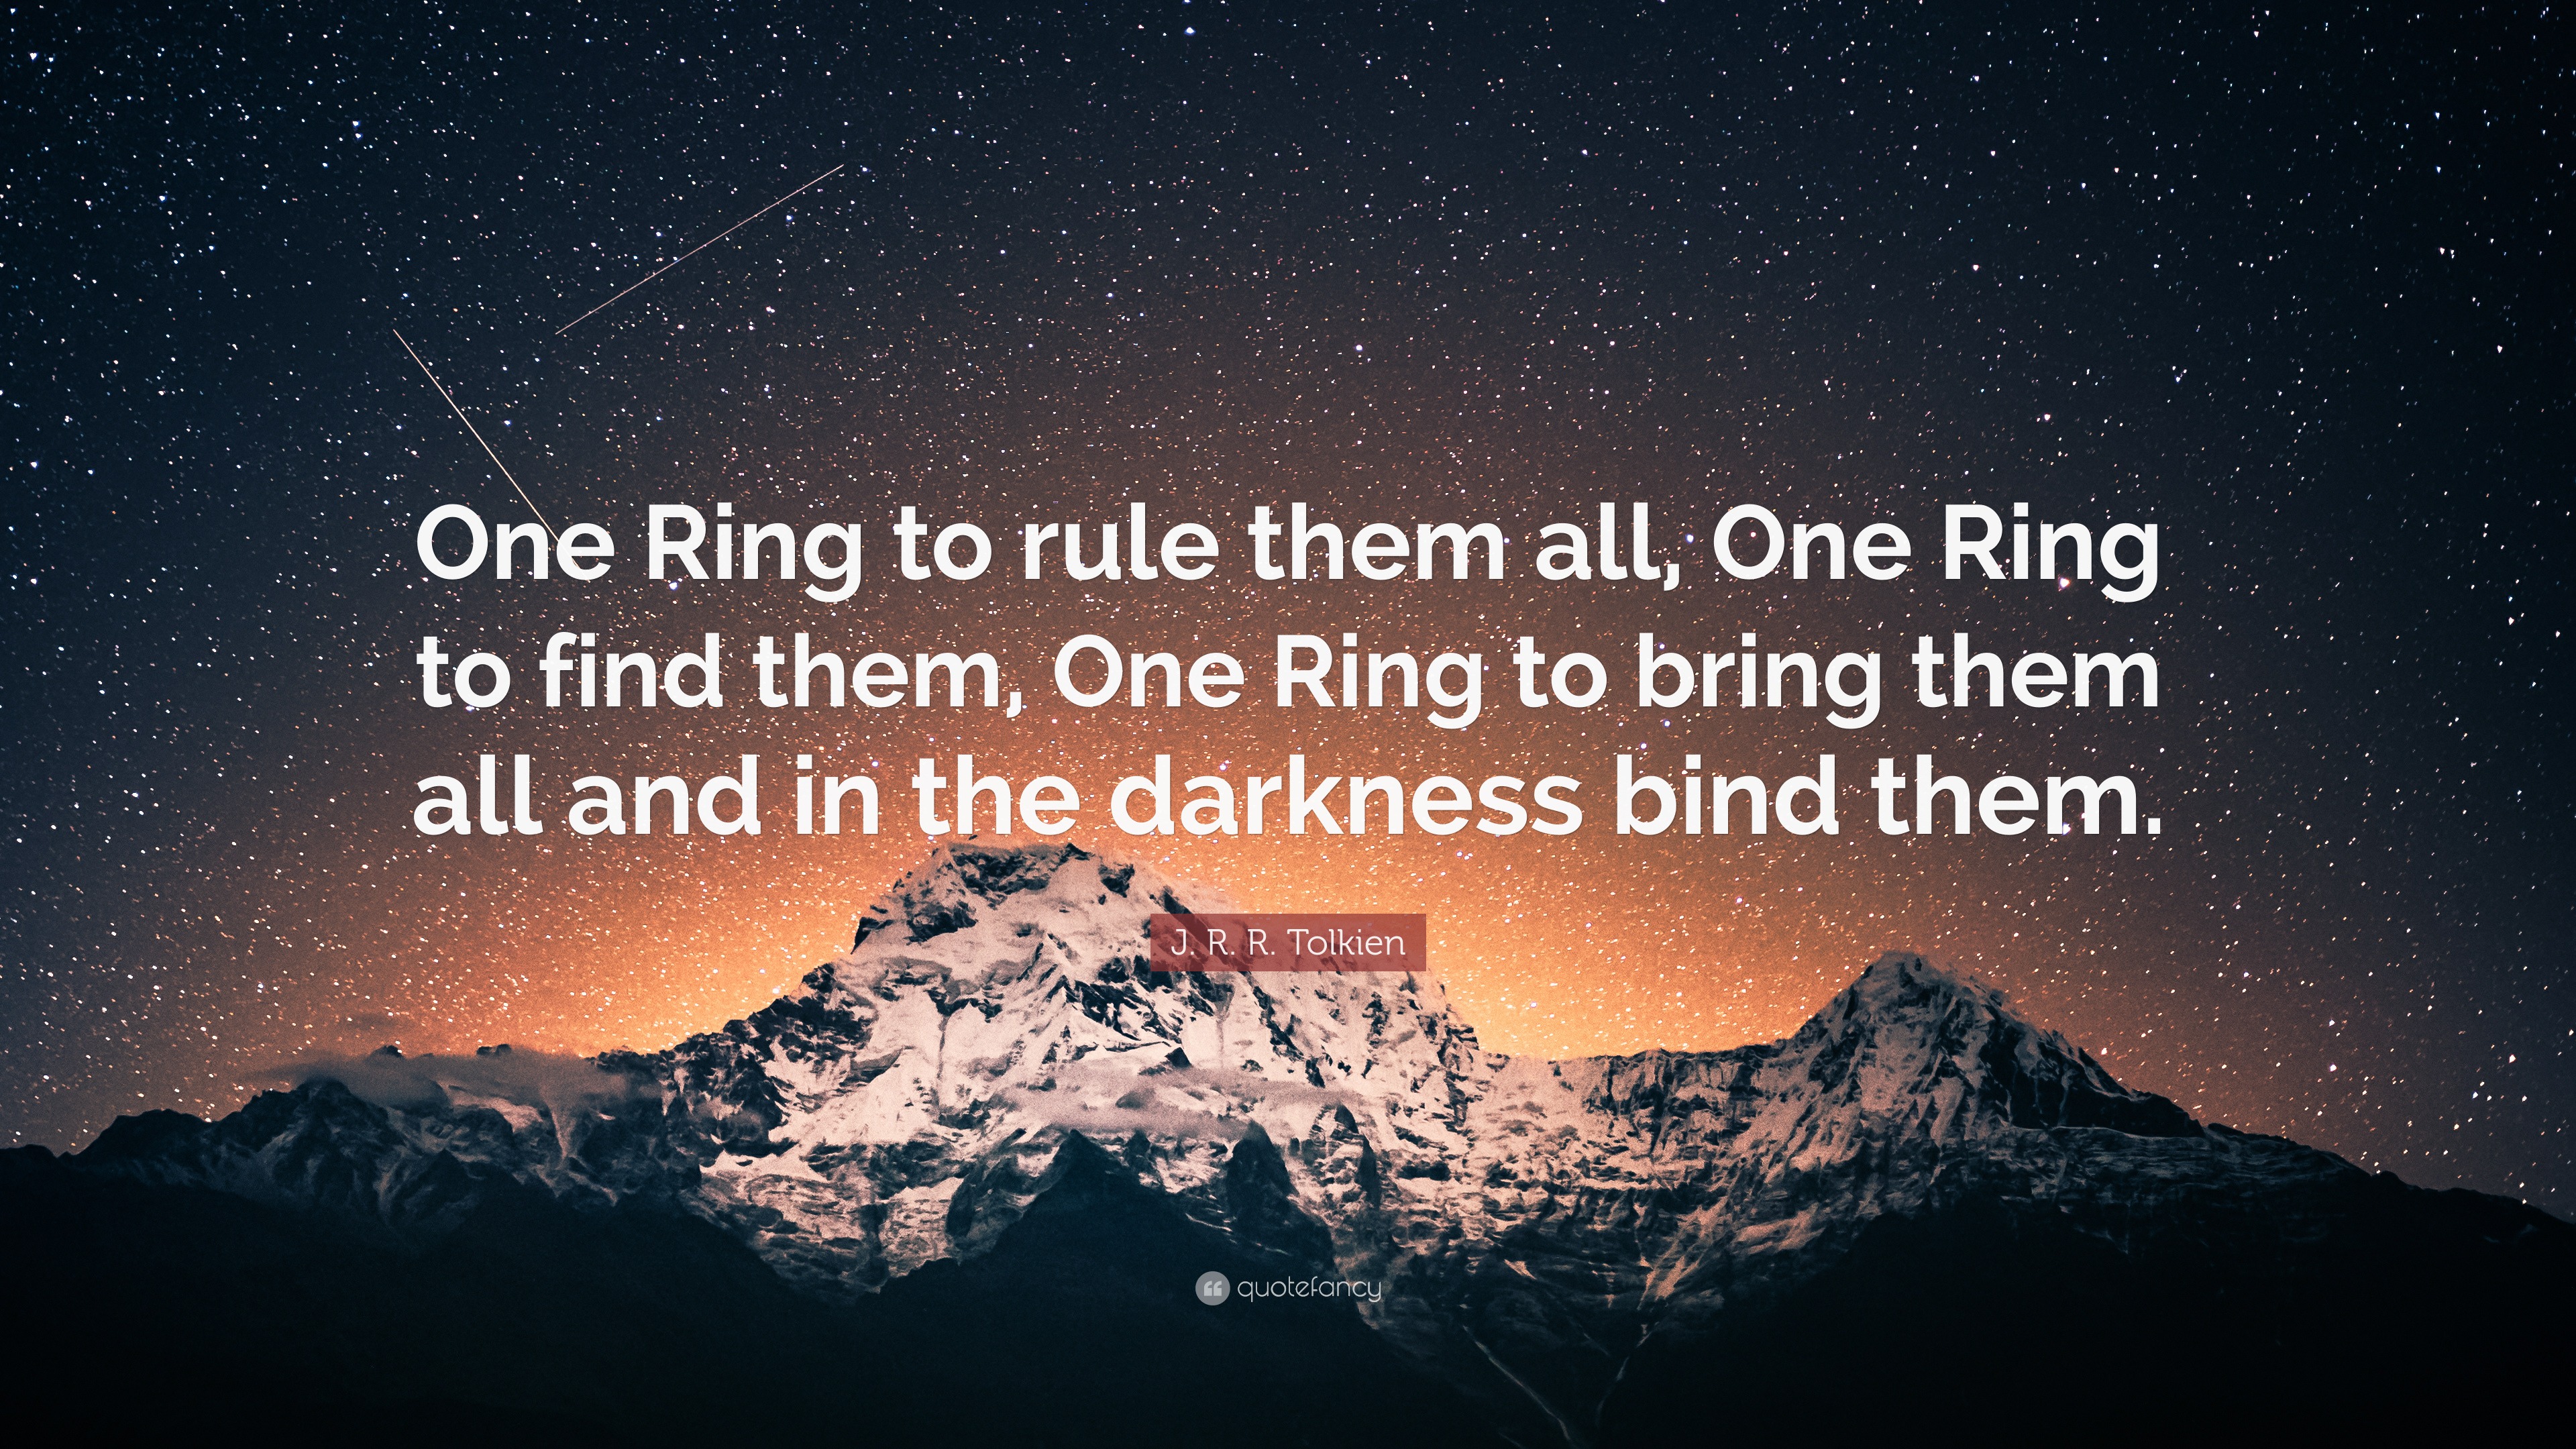 The Lord of the Rings Sauron The Hobbit One Ring to rule them all, One Ring  to find them, One Ring to bring them all and in the darkness bind them., the